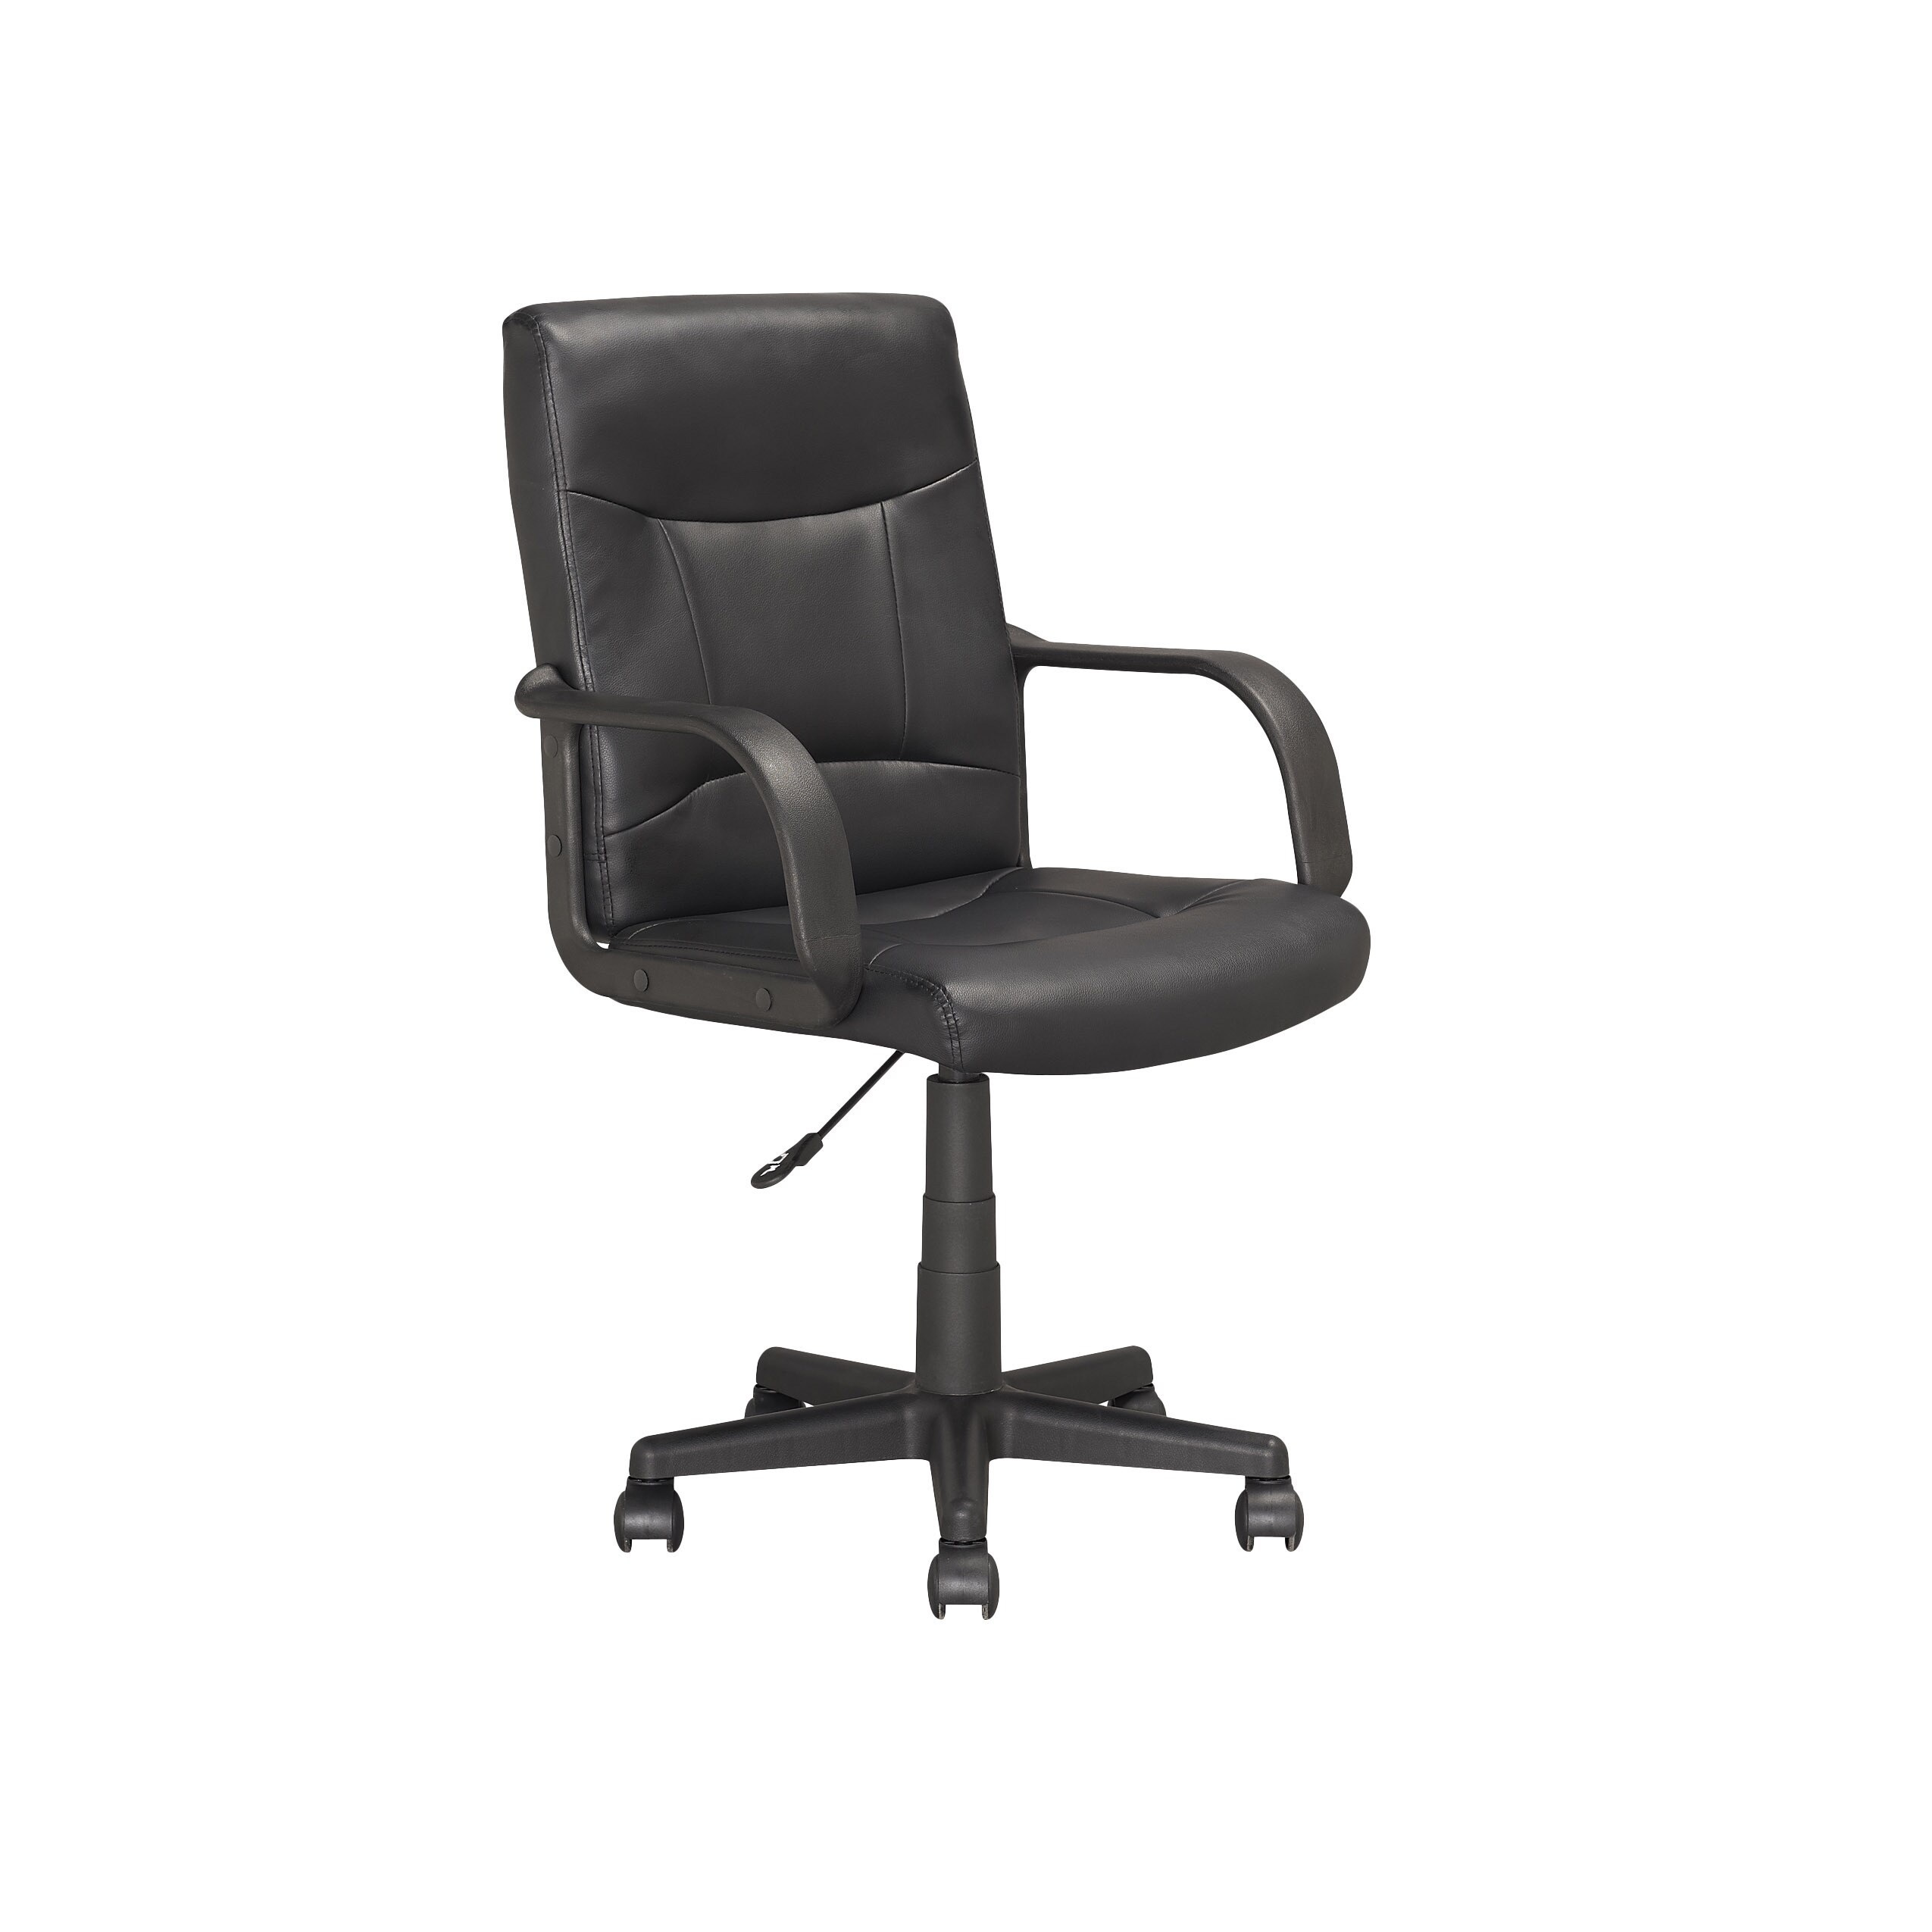 Corliving Lof 809 o Black Leatherette Executive Office Chair